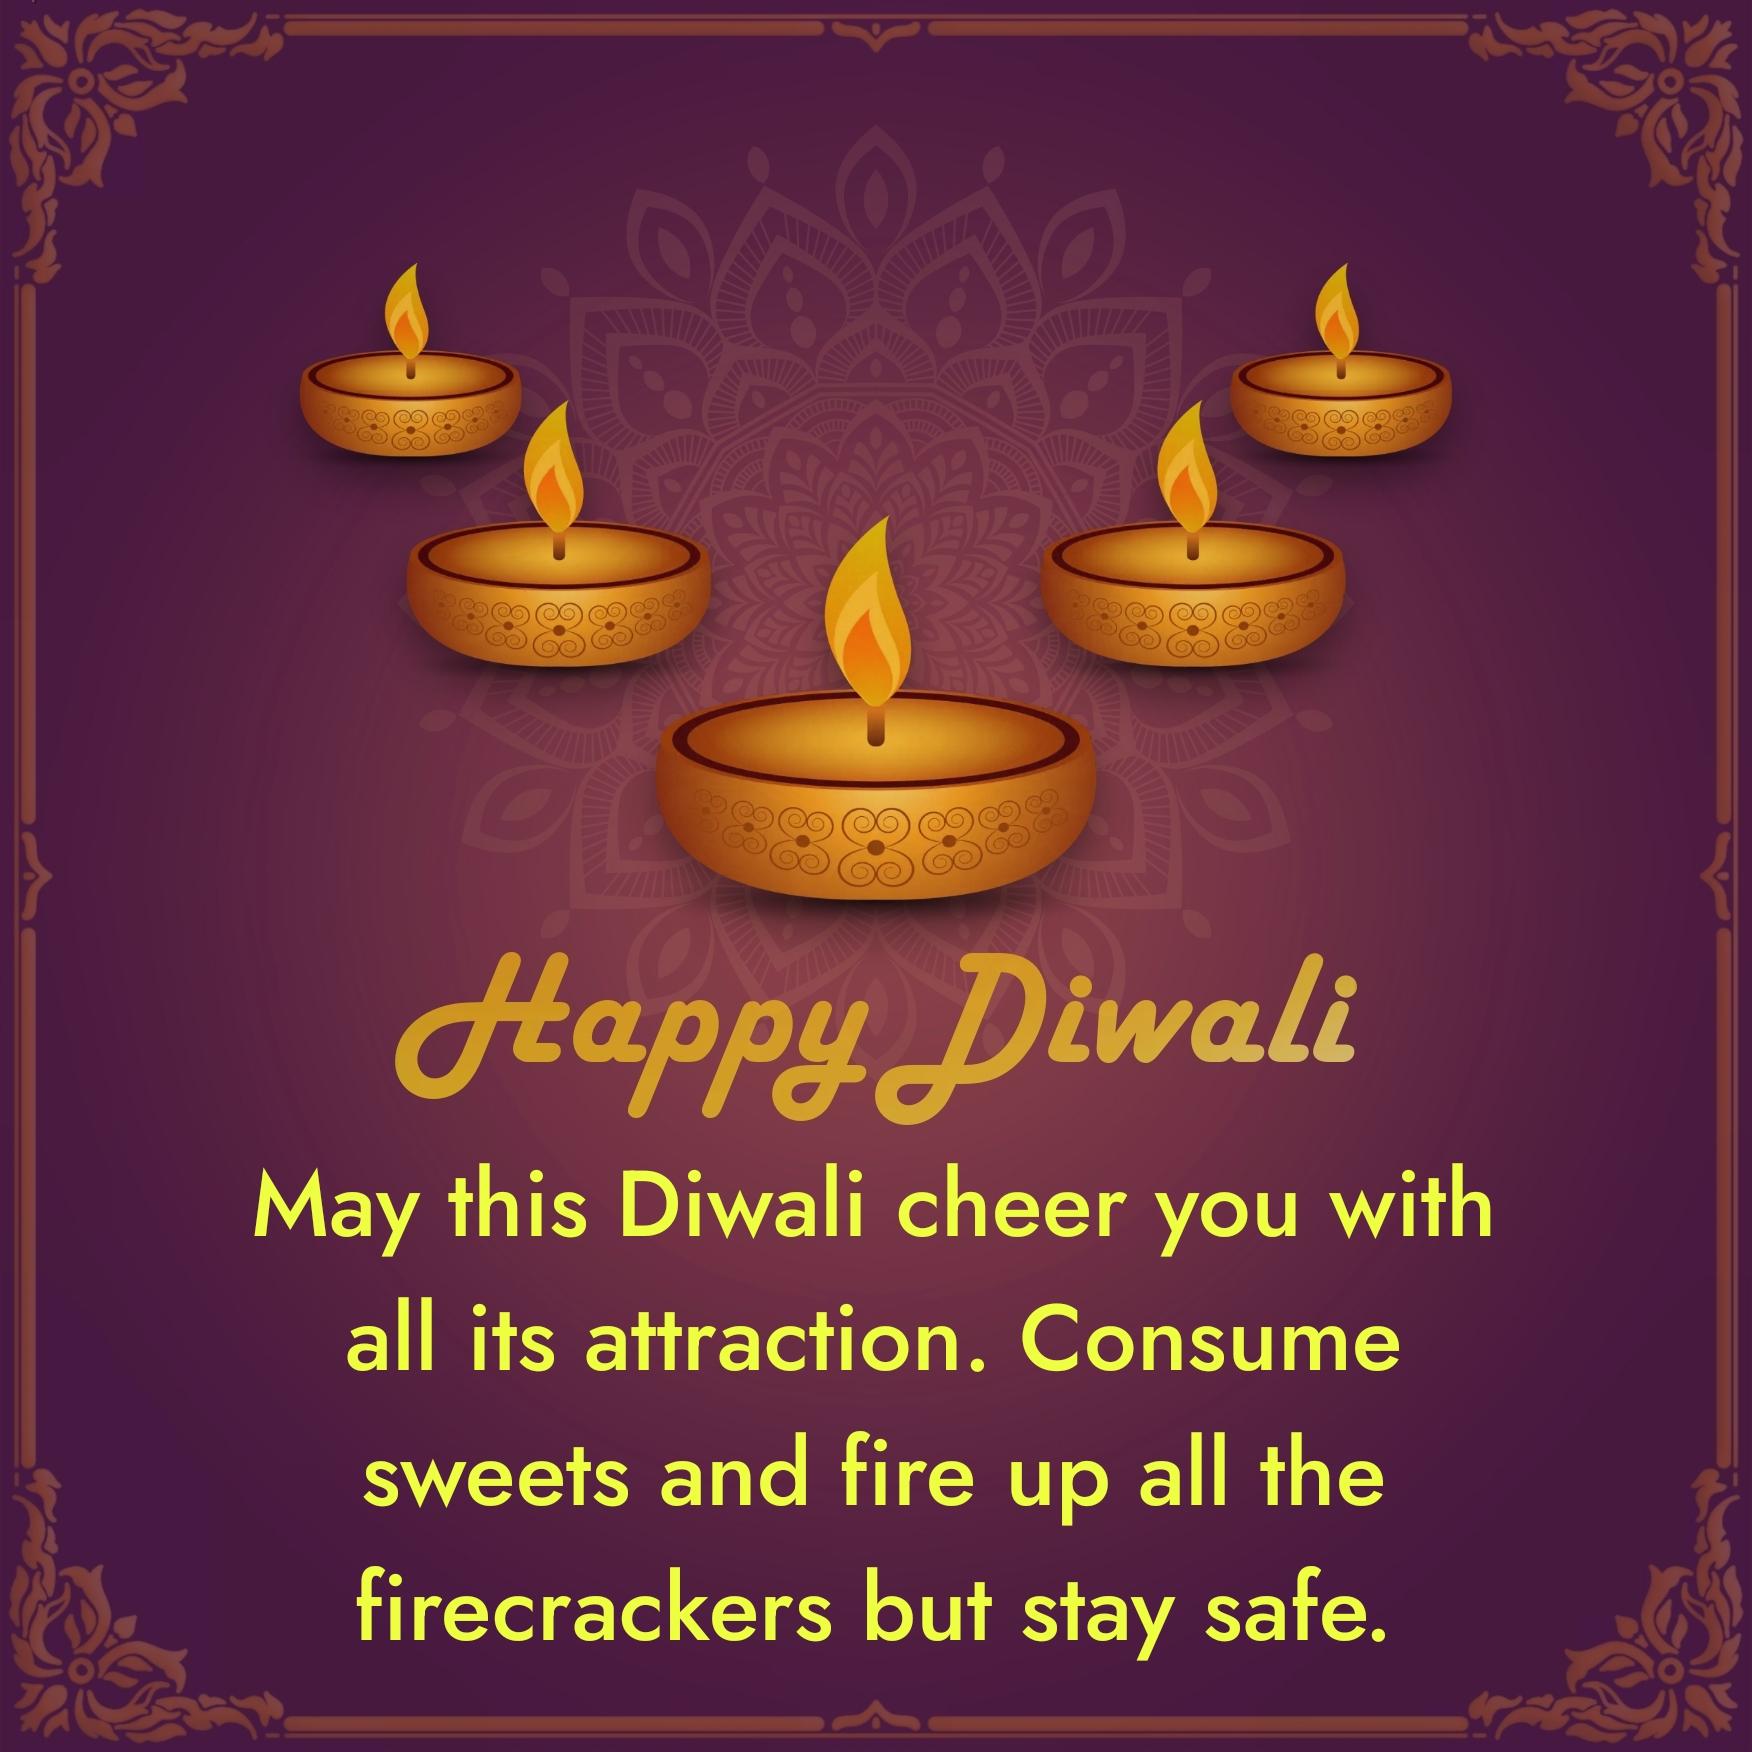 May this Diwali cheer you with all its attraction